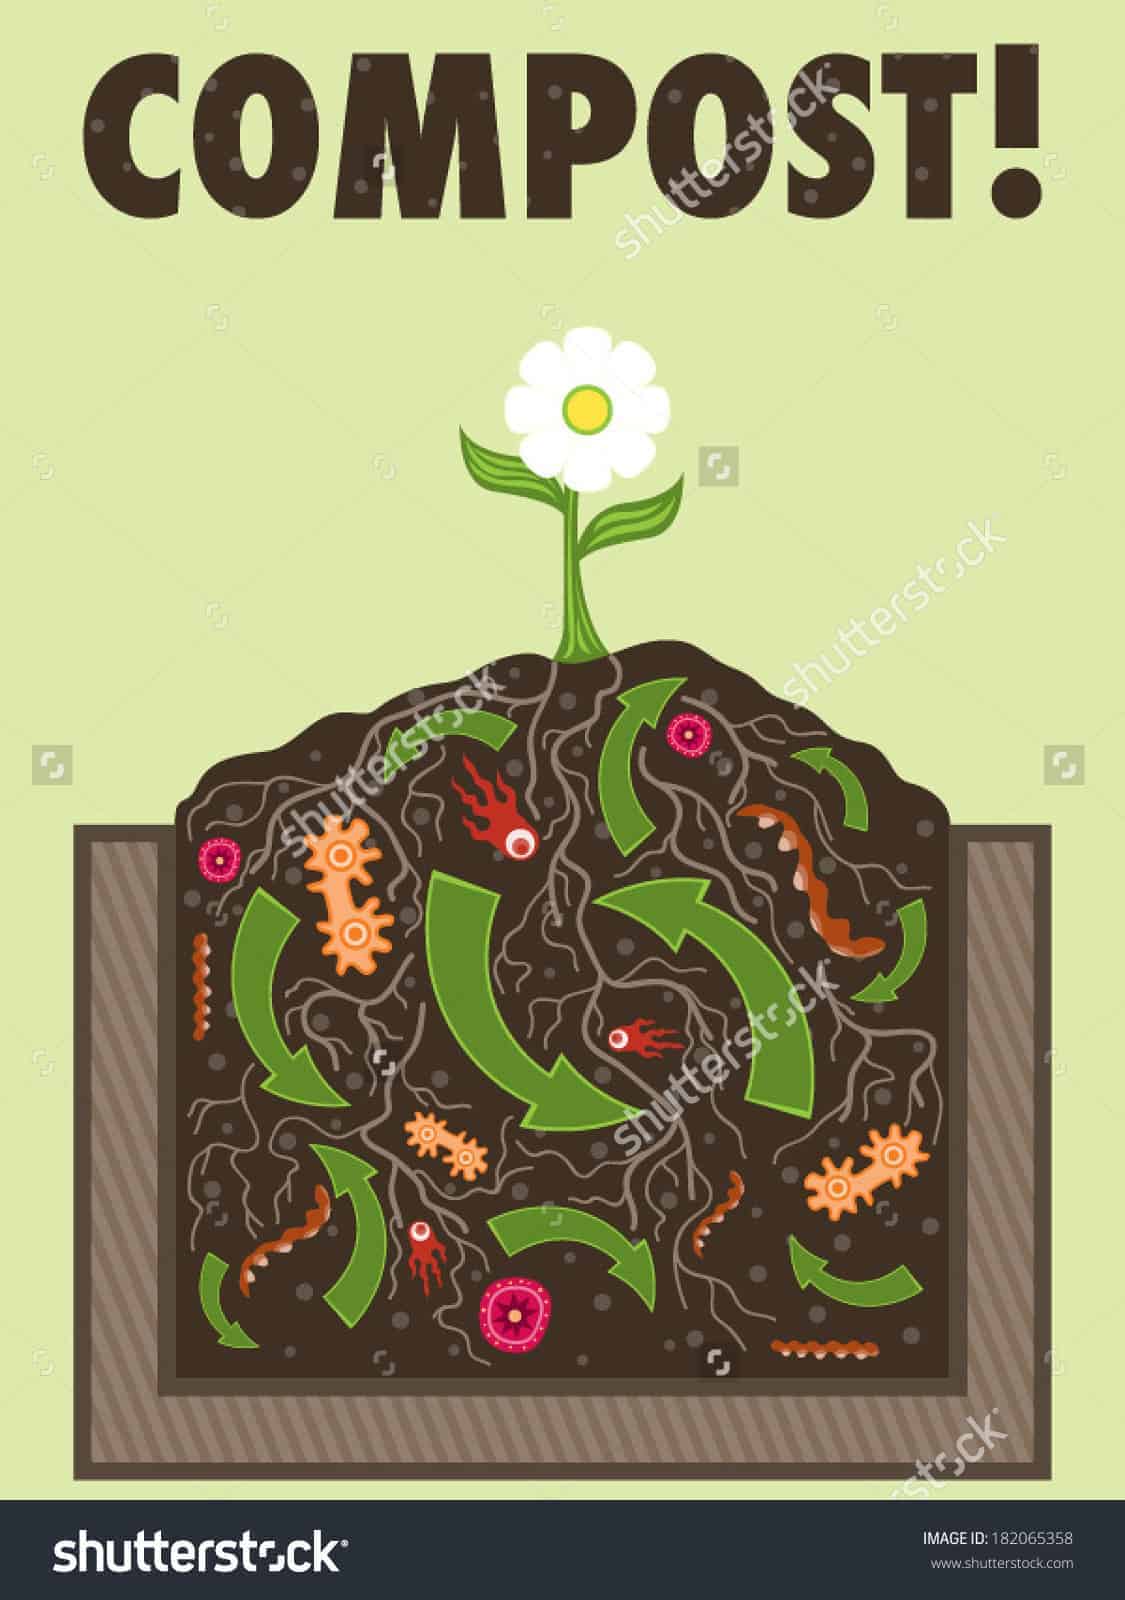 stock-vector-compost-organic-waste-recycling-to-soil-vector-illustration-182065358.jpg